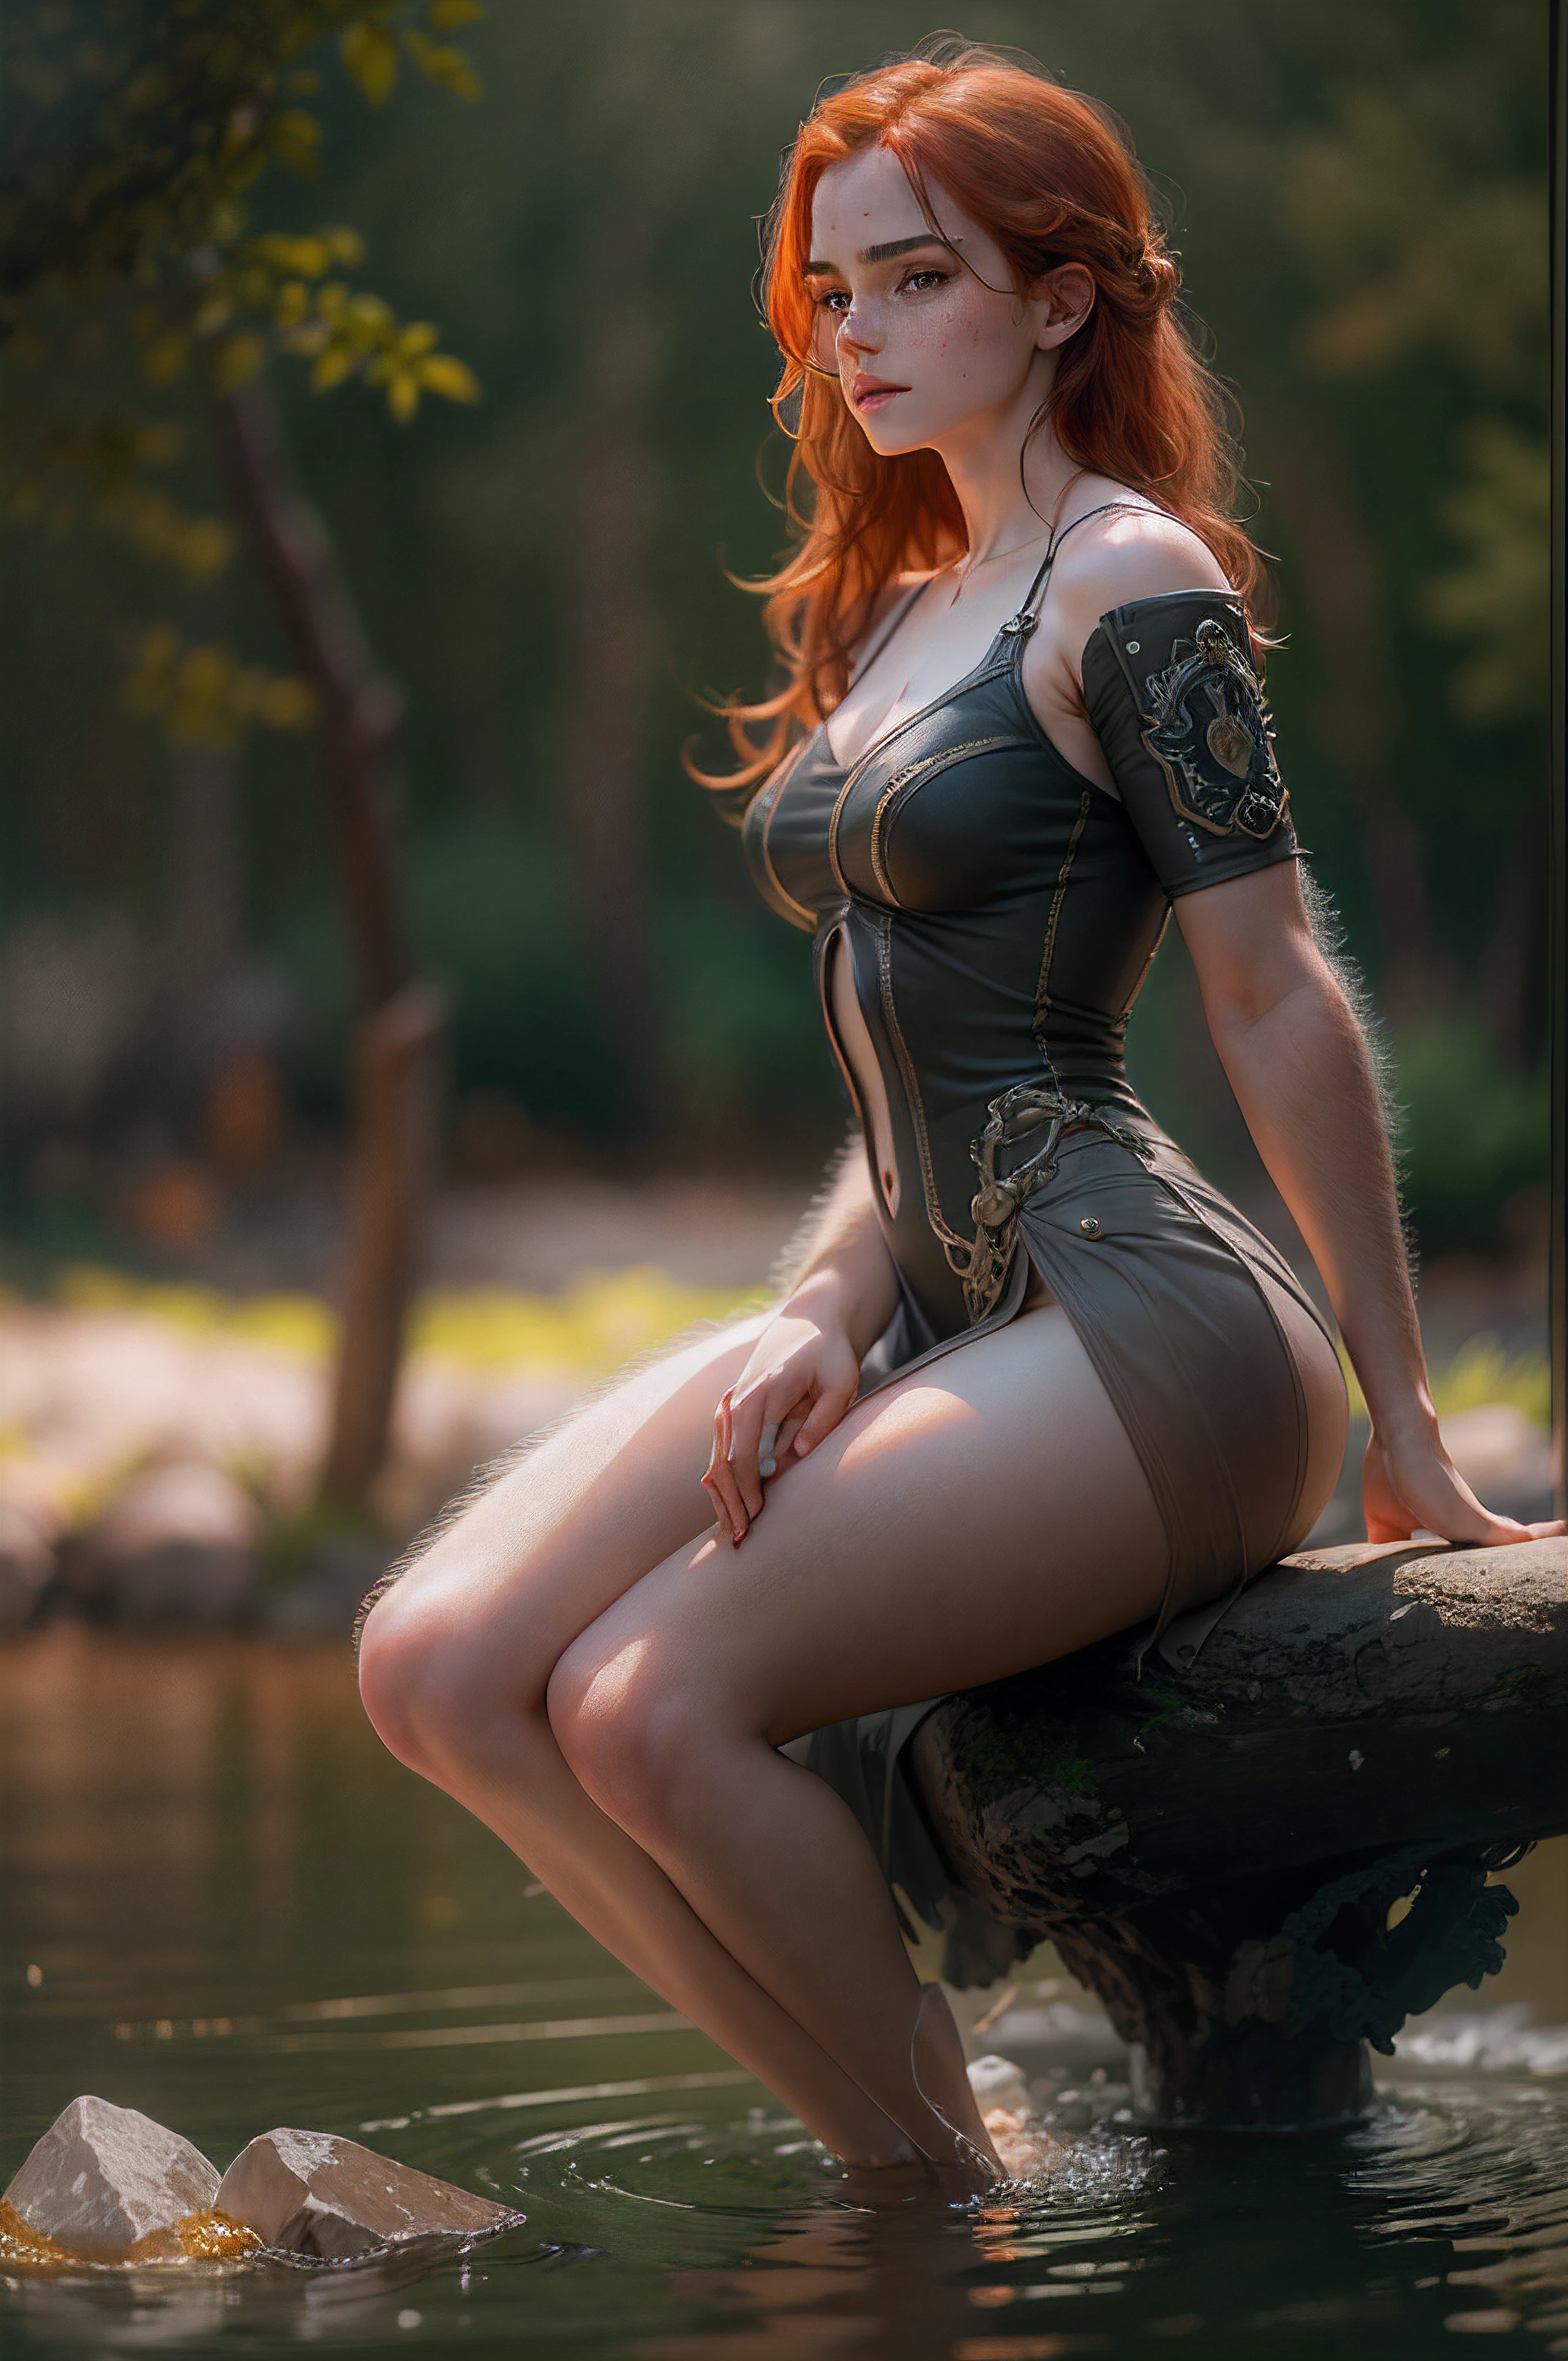 Masterpiece, (((full figure supermodel, full body shot, entire body in frame))), (((magical lighting action shot))) (((beautiful redhead fit pale smiling goddess Scottish woman kneeling in river garden in a park, arms covering flat chest, arms across , arms folded))), (((micro outfit, looking into the camera))) , ((( redhead hair, accurate hands accurate eyes))) moody lighting, very detailed, dramatic lighting, digital art trending on Artstation 8k HD high definition detailed realistic, detailed, skin texture, hyper detailed, realistic skin texture, armature, best quality, ultra high res, (photorealistic:1.4), high resolution, detailed, raw photo, sharp re, nikon d850 film stock photograph 4 kodak portra 400 camera f1.6 lens rich colors hyper realistic lifelike texture dramatic lighting unrealengine trending on artstation cinestill 800, (((accurate female anatomy, perfect eyes))) (((500px, fstoppers, photosight.ru, iso noise))) portrait of beautiful women, looking over spruce forest, moody portrait, striking features, beauty, intricate details, dramatic composition, tension, wispy hair, blue eyes, contrast, texture, realism, high-quality rendering, stunning art, high quality, film grain, Fujifilm XT3, acne, blemishes, detailed skin, freckled